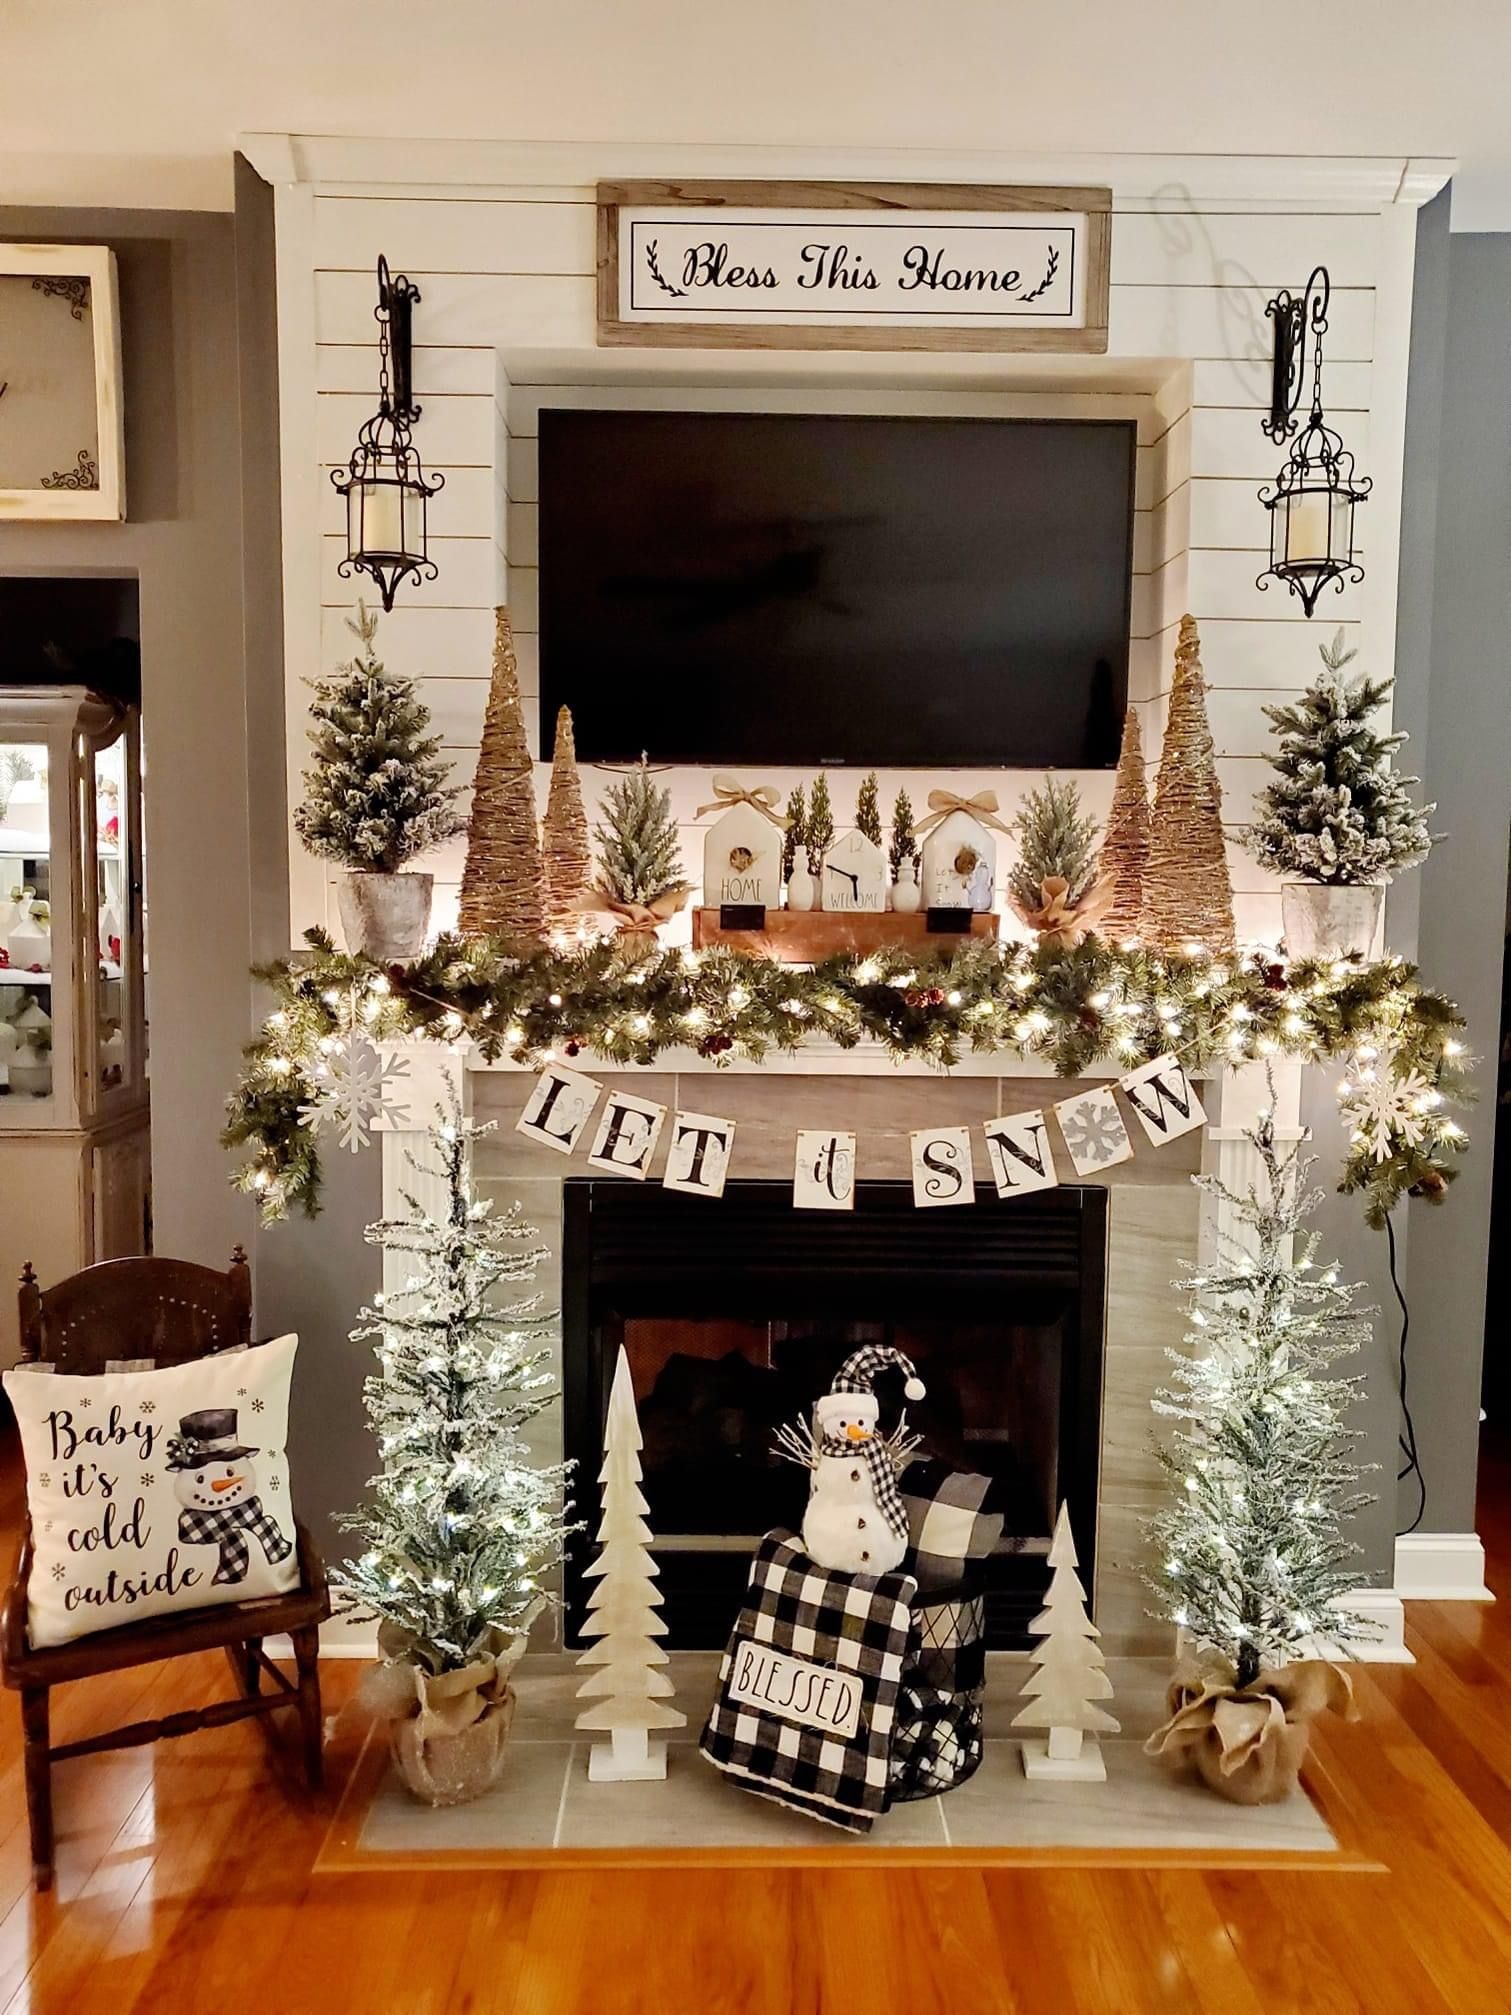 Snowy Theme for Christmas Fireplace